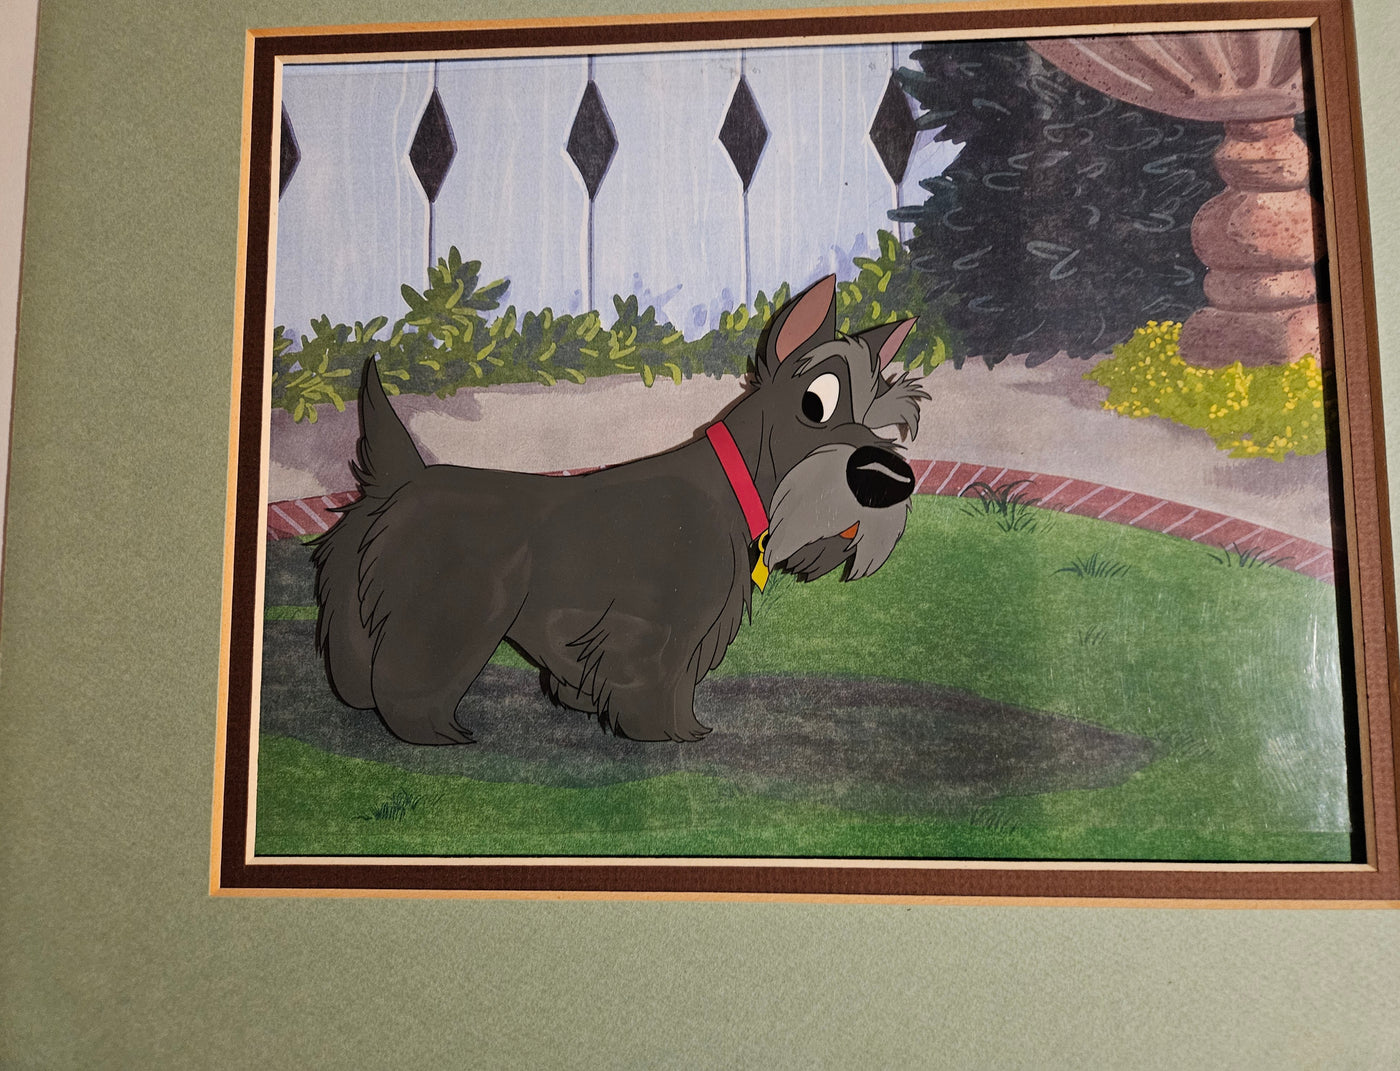 Original Walt Disney Production Cel from Lady and the Tramp featuring Jock